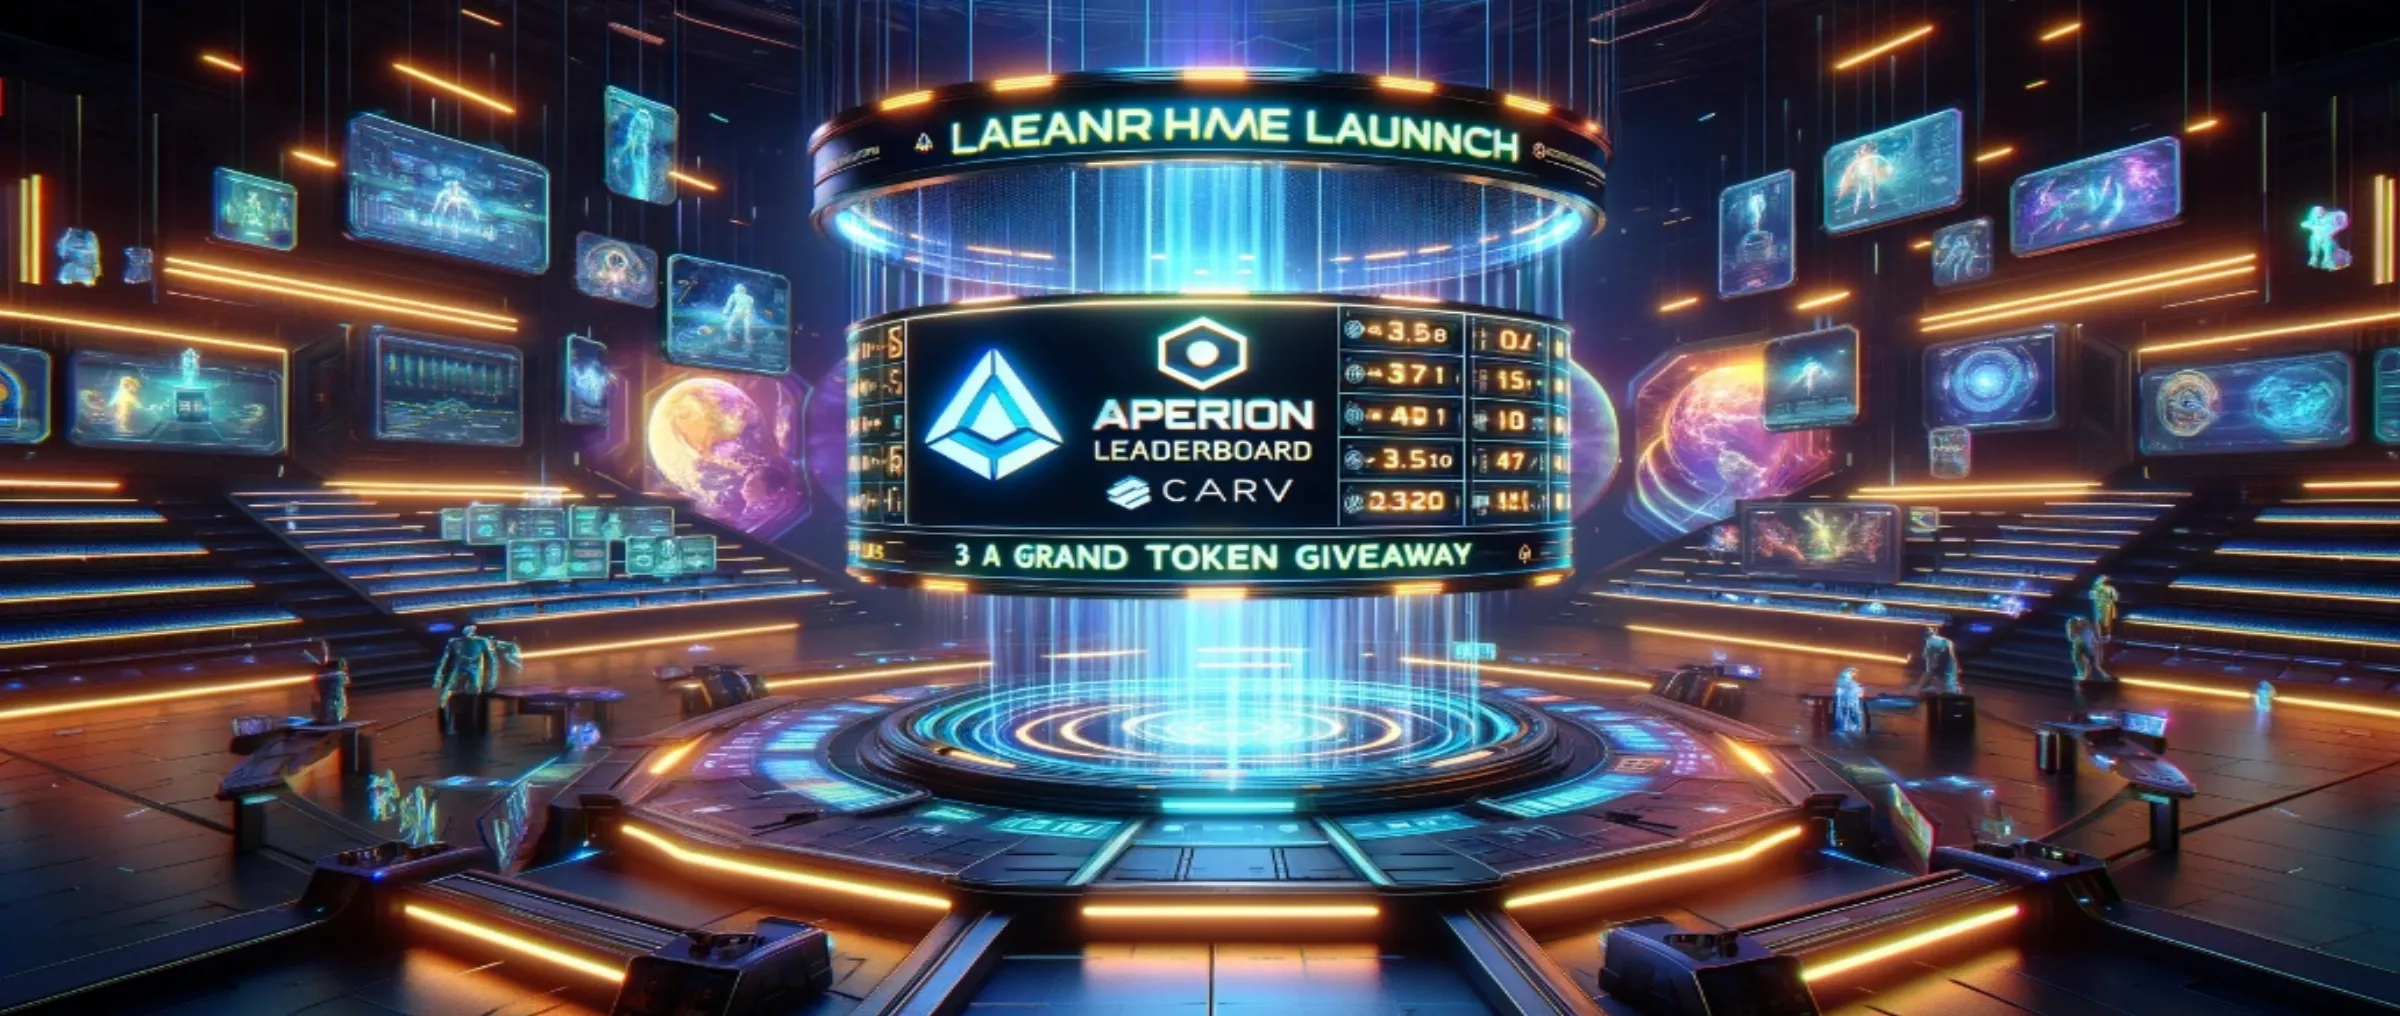 Apeiron Launches a new Arena Leaderboard, Entering into an exciting partnership with CARV and Launching a token giveaway